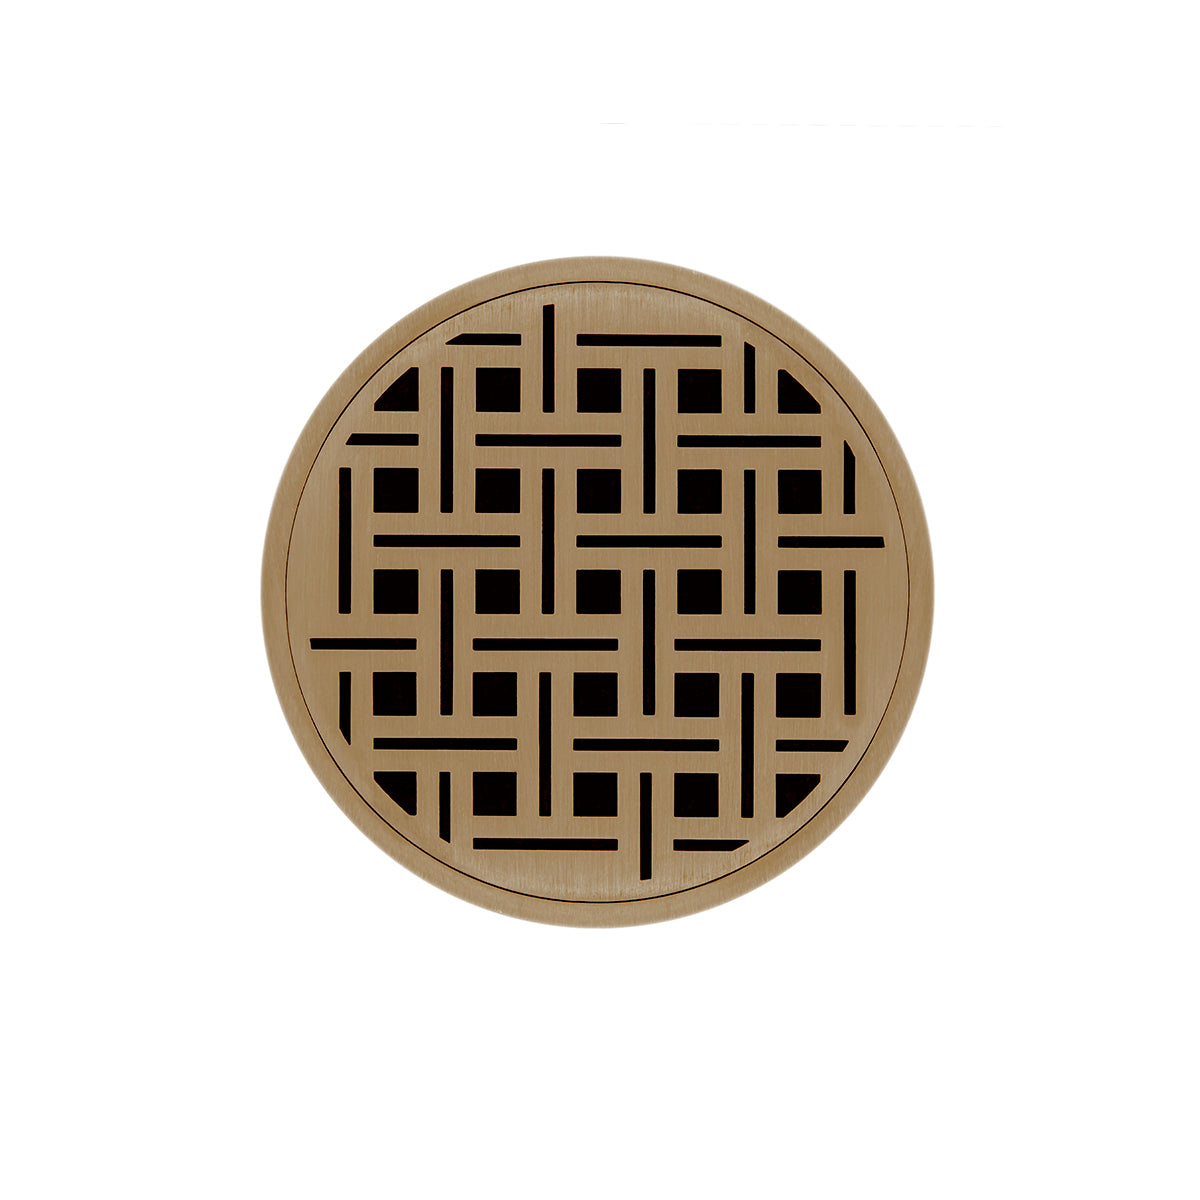 Infinity Drain 5" Round RVD 5 High Flow Premium Center Drain Kit with Weave Pattern Decorative Plate with ABS Drain Body, 3" Outlet